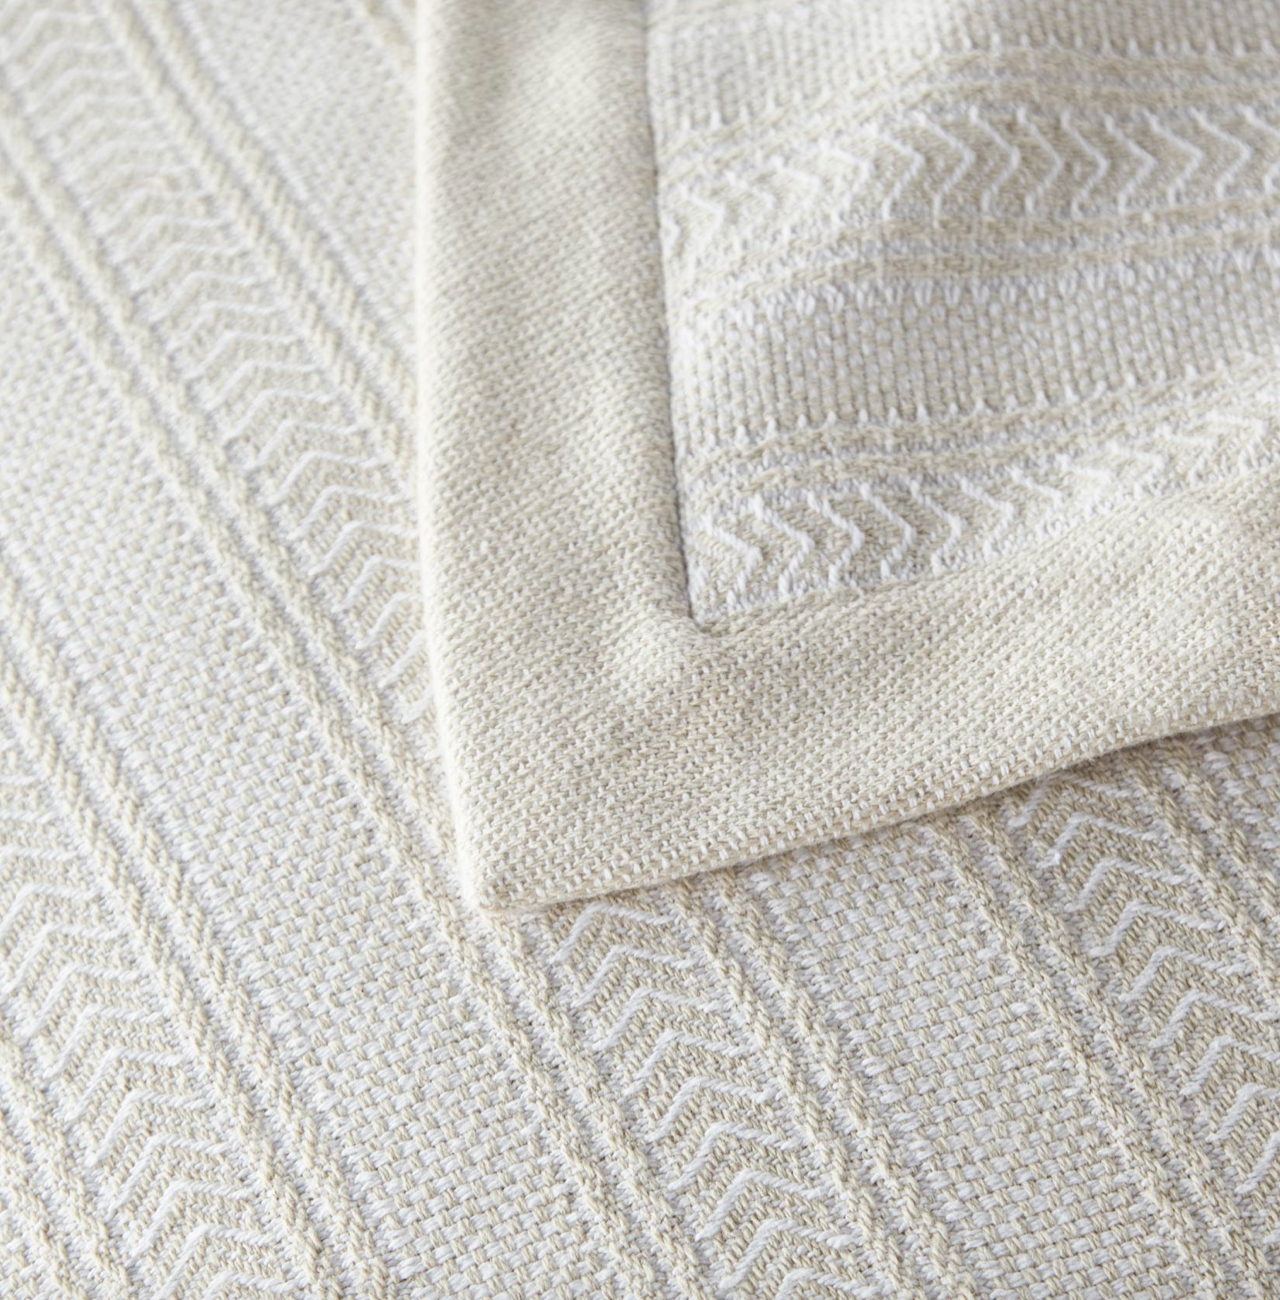 Terrace cotton and linen blanket by Peacock Alley